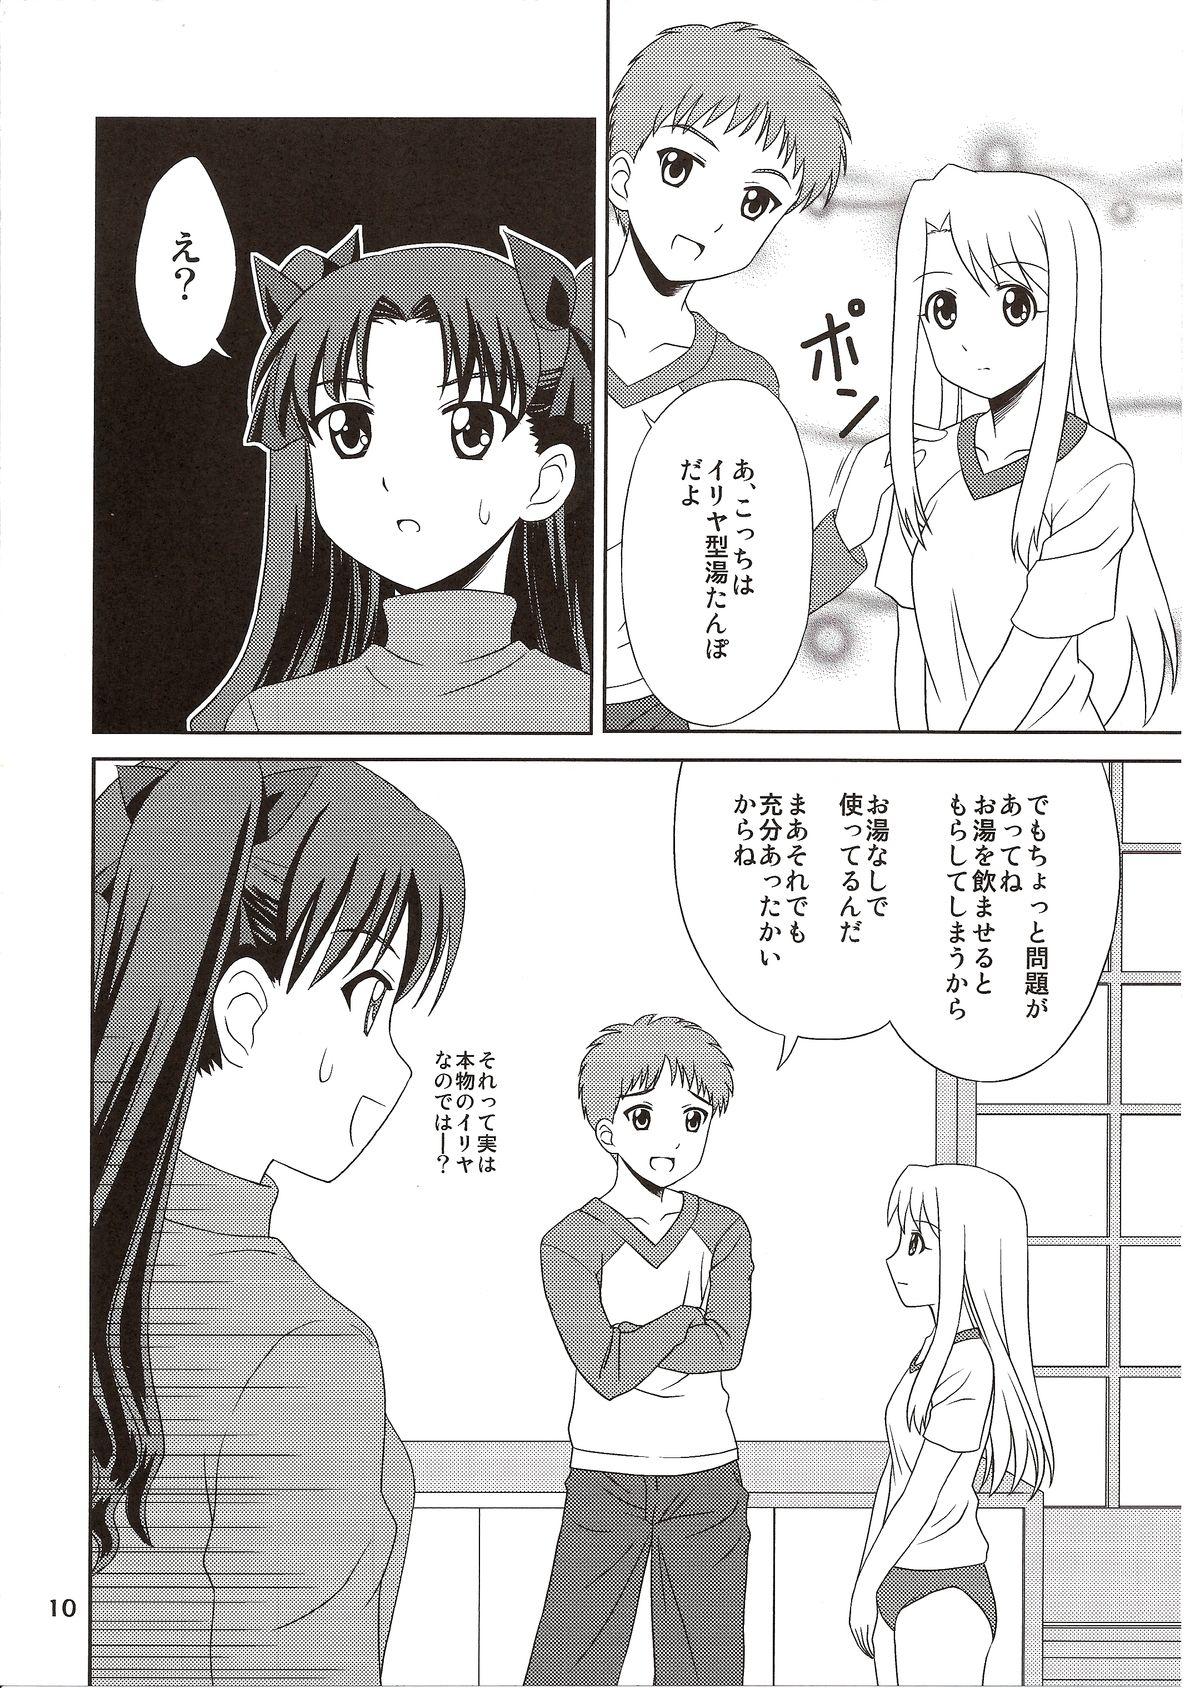 Old Vs Young Carni☆Phan tic factory 5 - Fate stay night Fate zero Best Blow Job Ever - Page 10